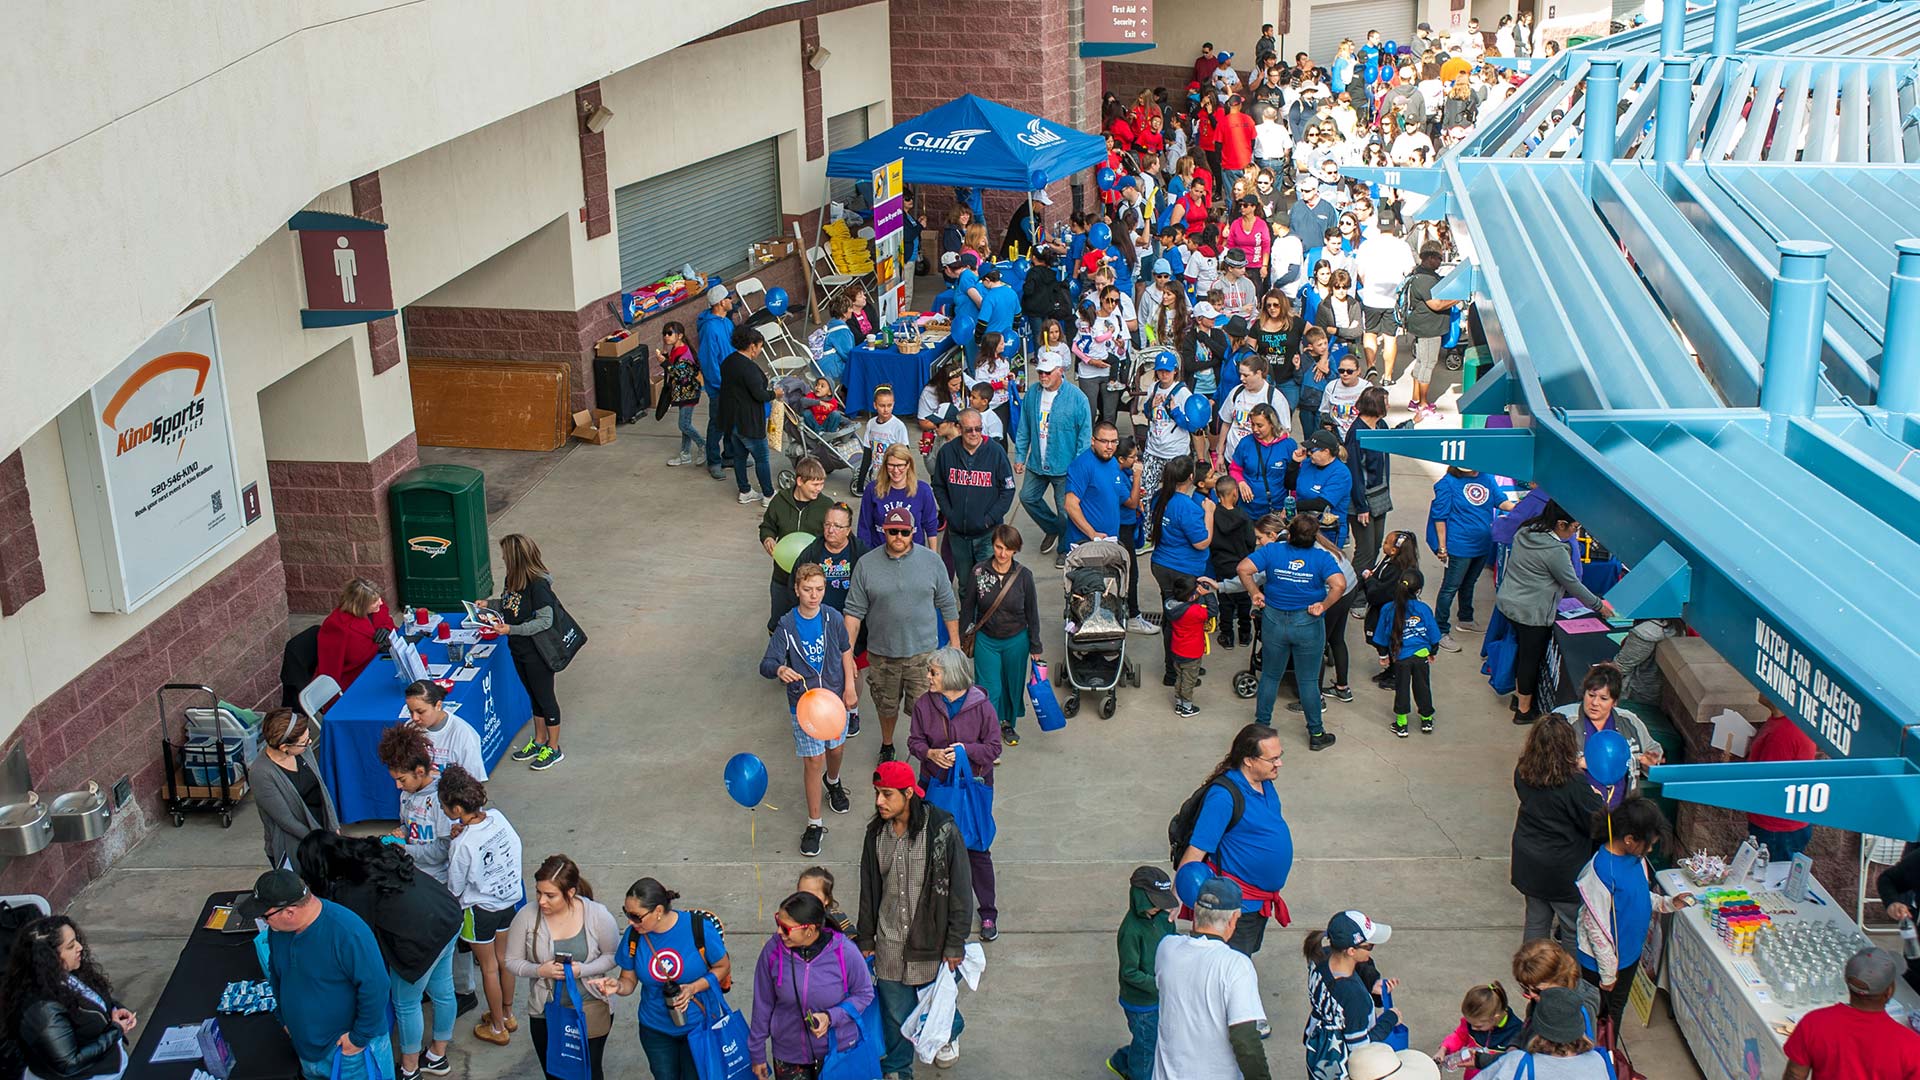 The Autism Society of Southern Arizona's Autism Walk & Resource Fair at TEP Park in 2018.